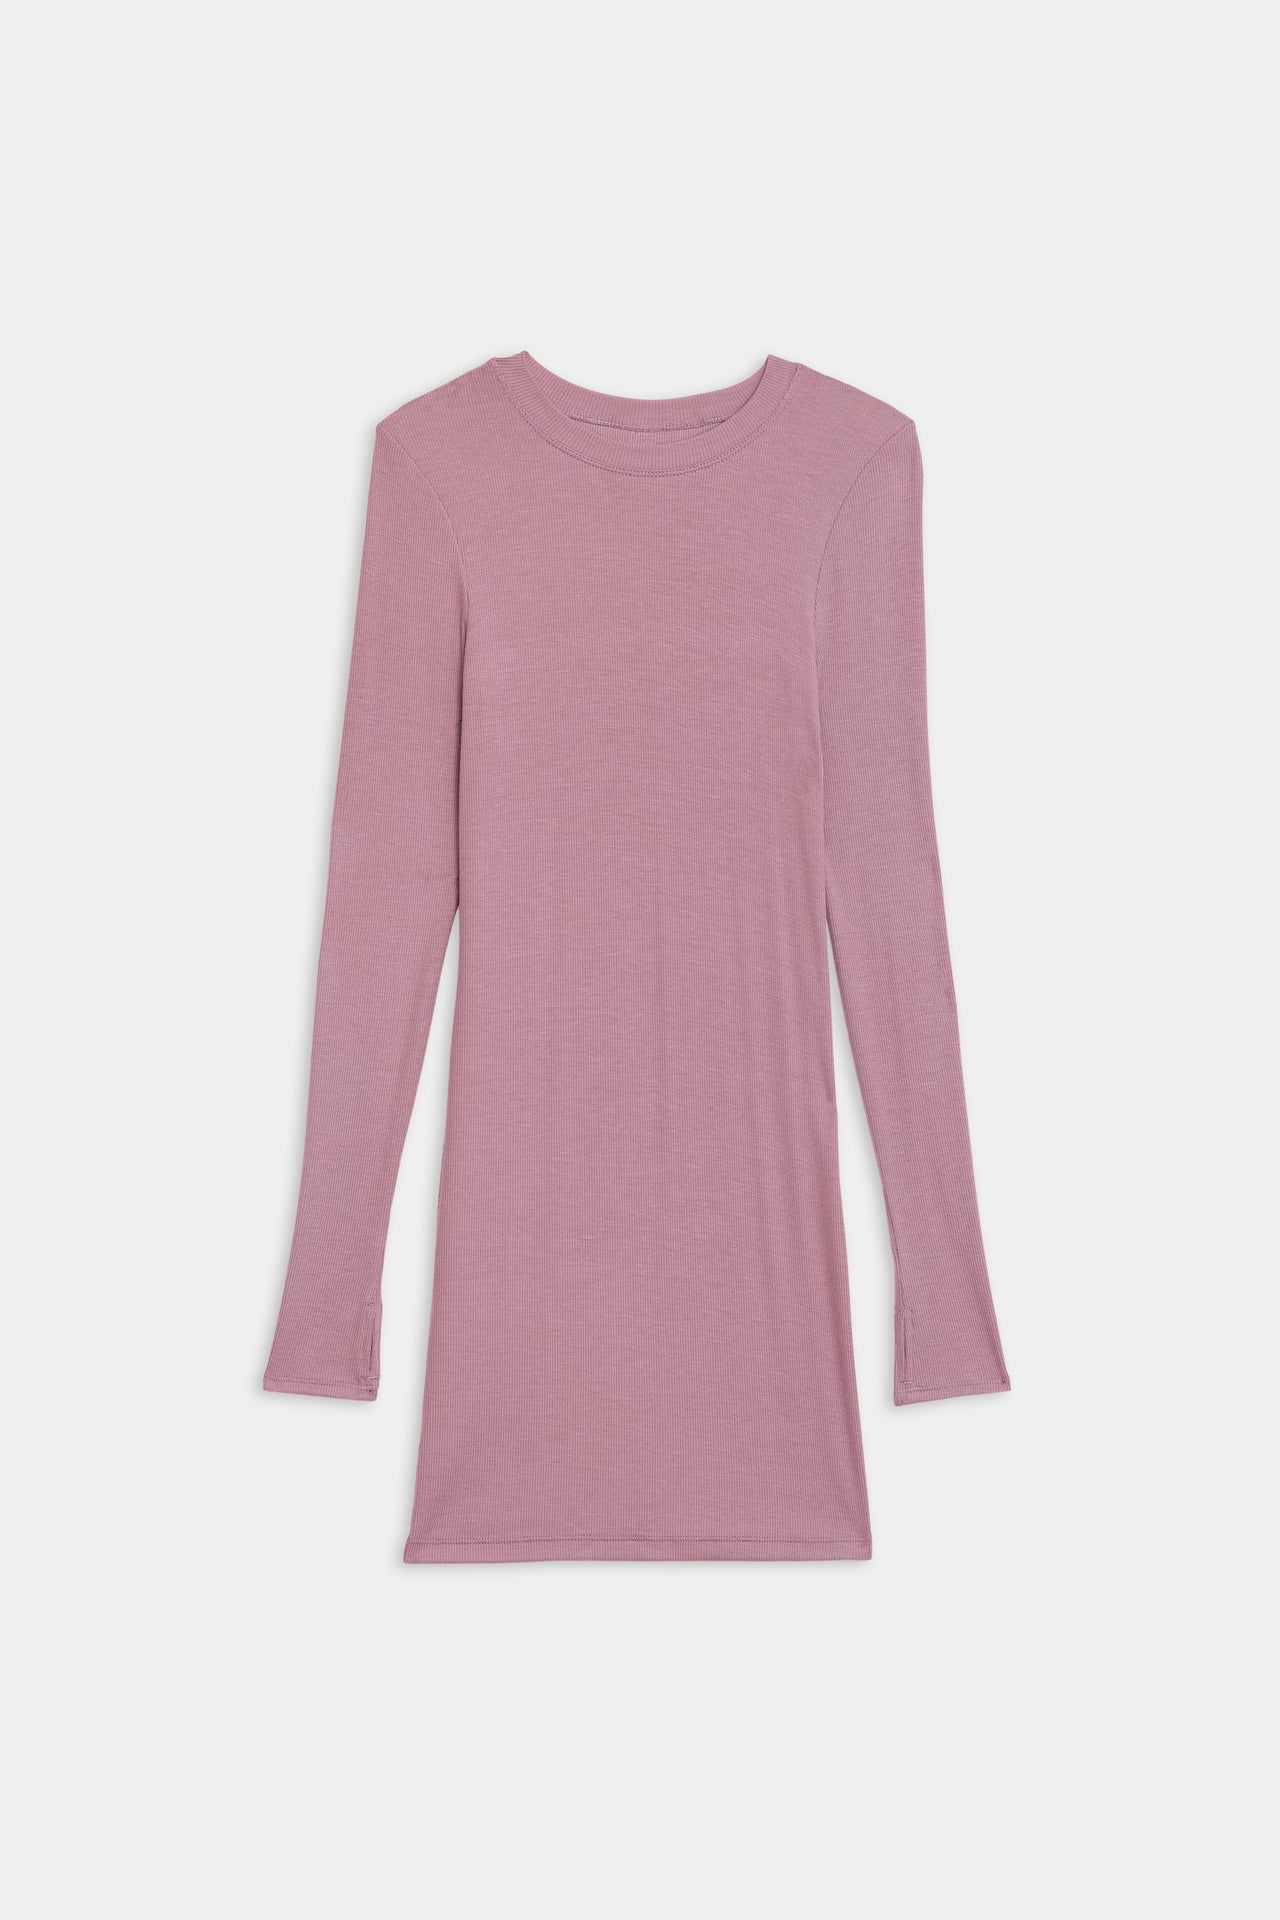 A SPLITS59 Louise Rib Long Sleeve Dress in Blush, suitable for casual wear.